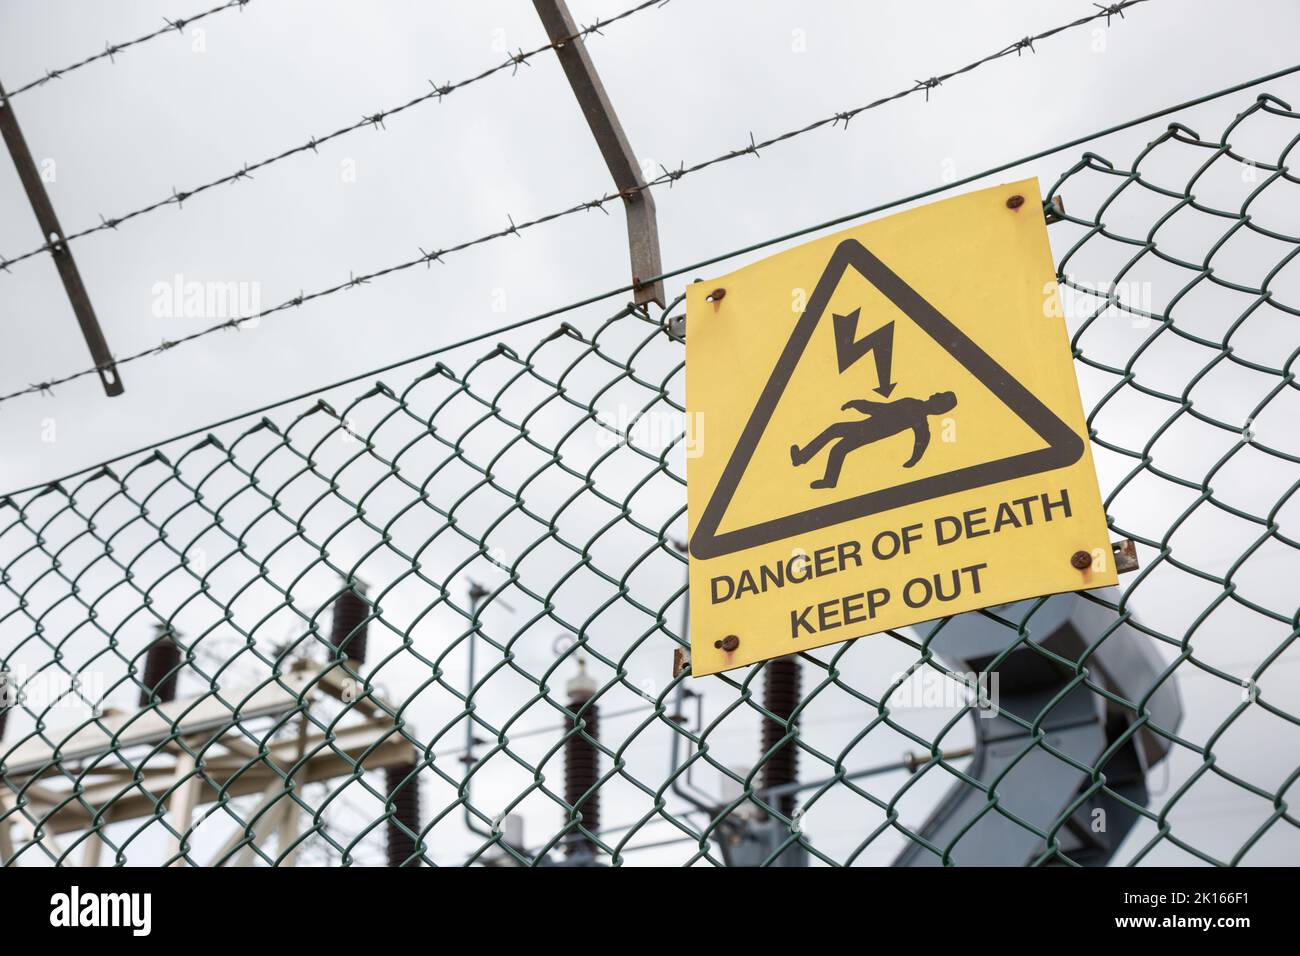 Danger of death sign on a fence, electricity substation, UK 2022 Stock Photo